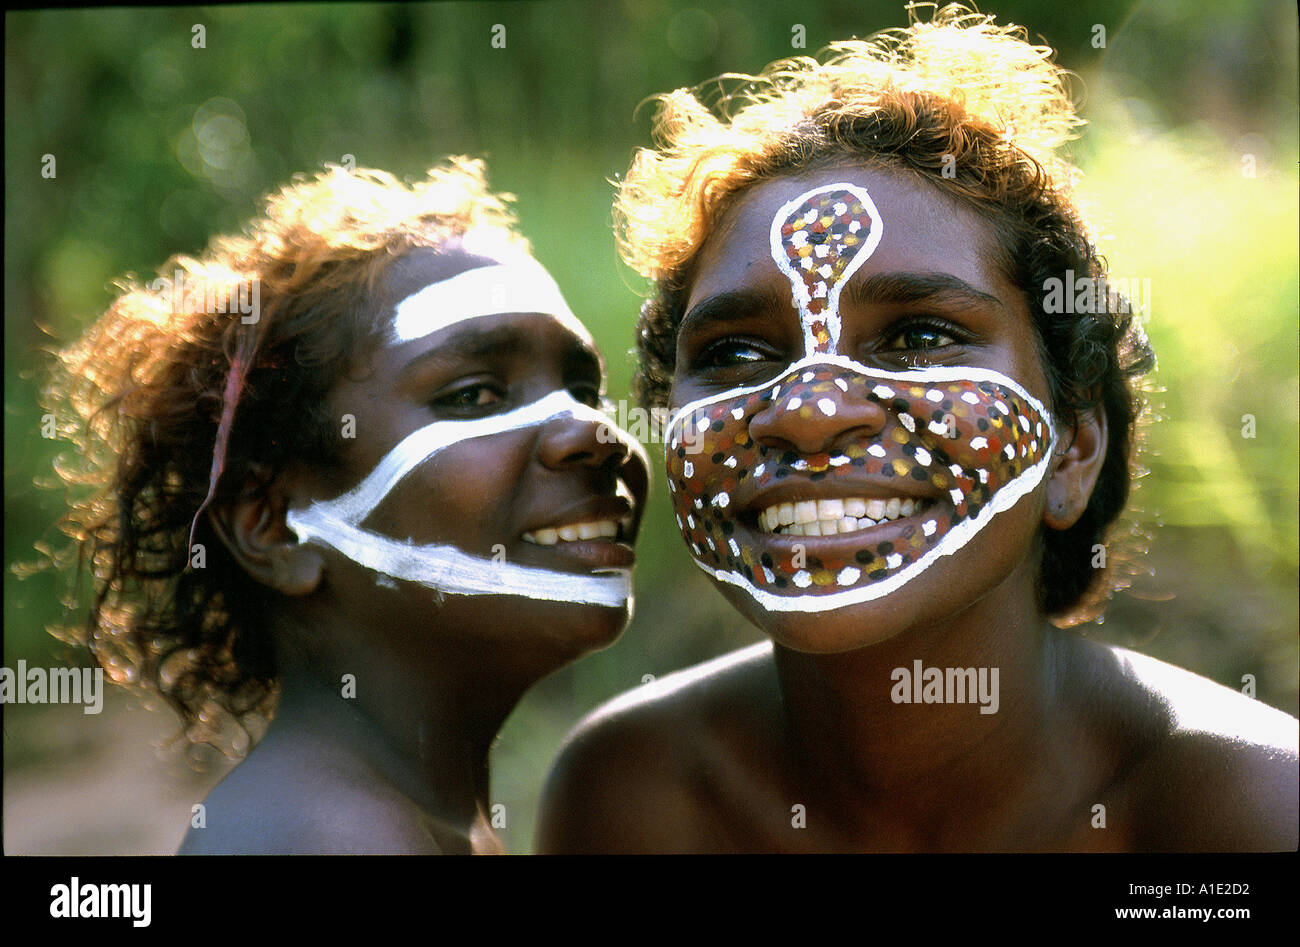 Aboriginal sisters Tessa and Jane enjoy painting their faces with their clan motives and totems at remote Ramingining ArnhemLand Stock Photo